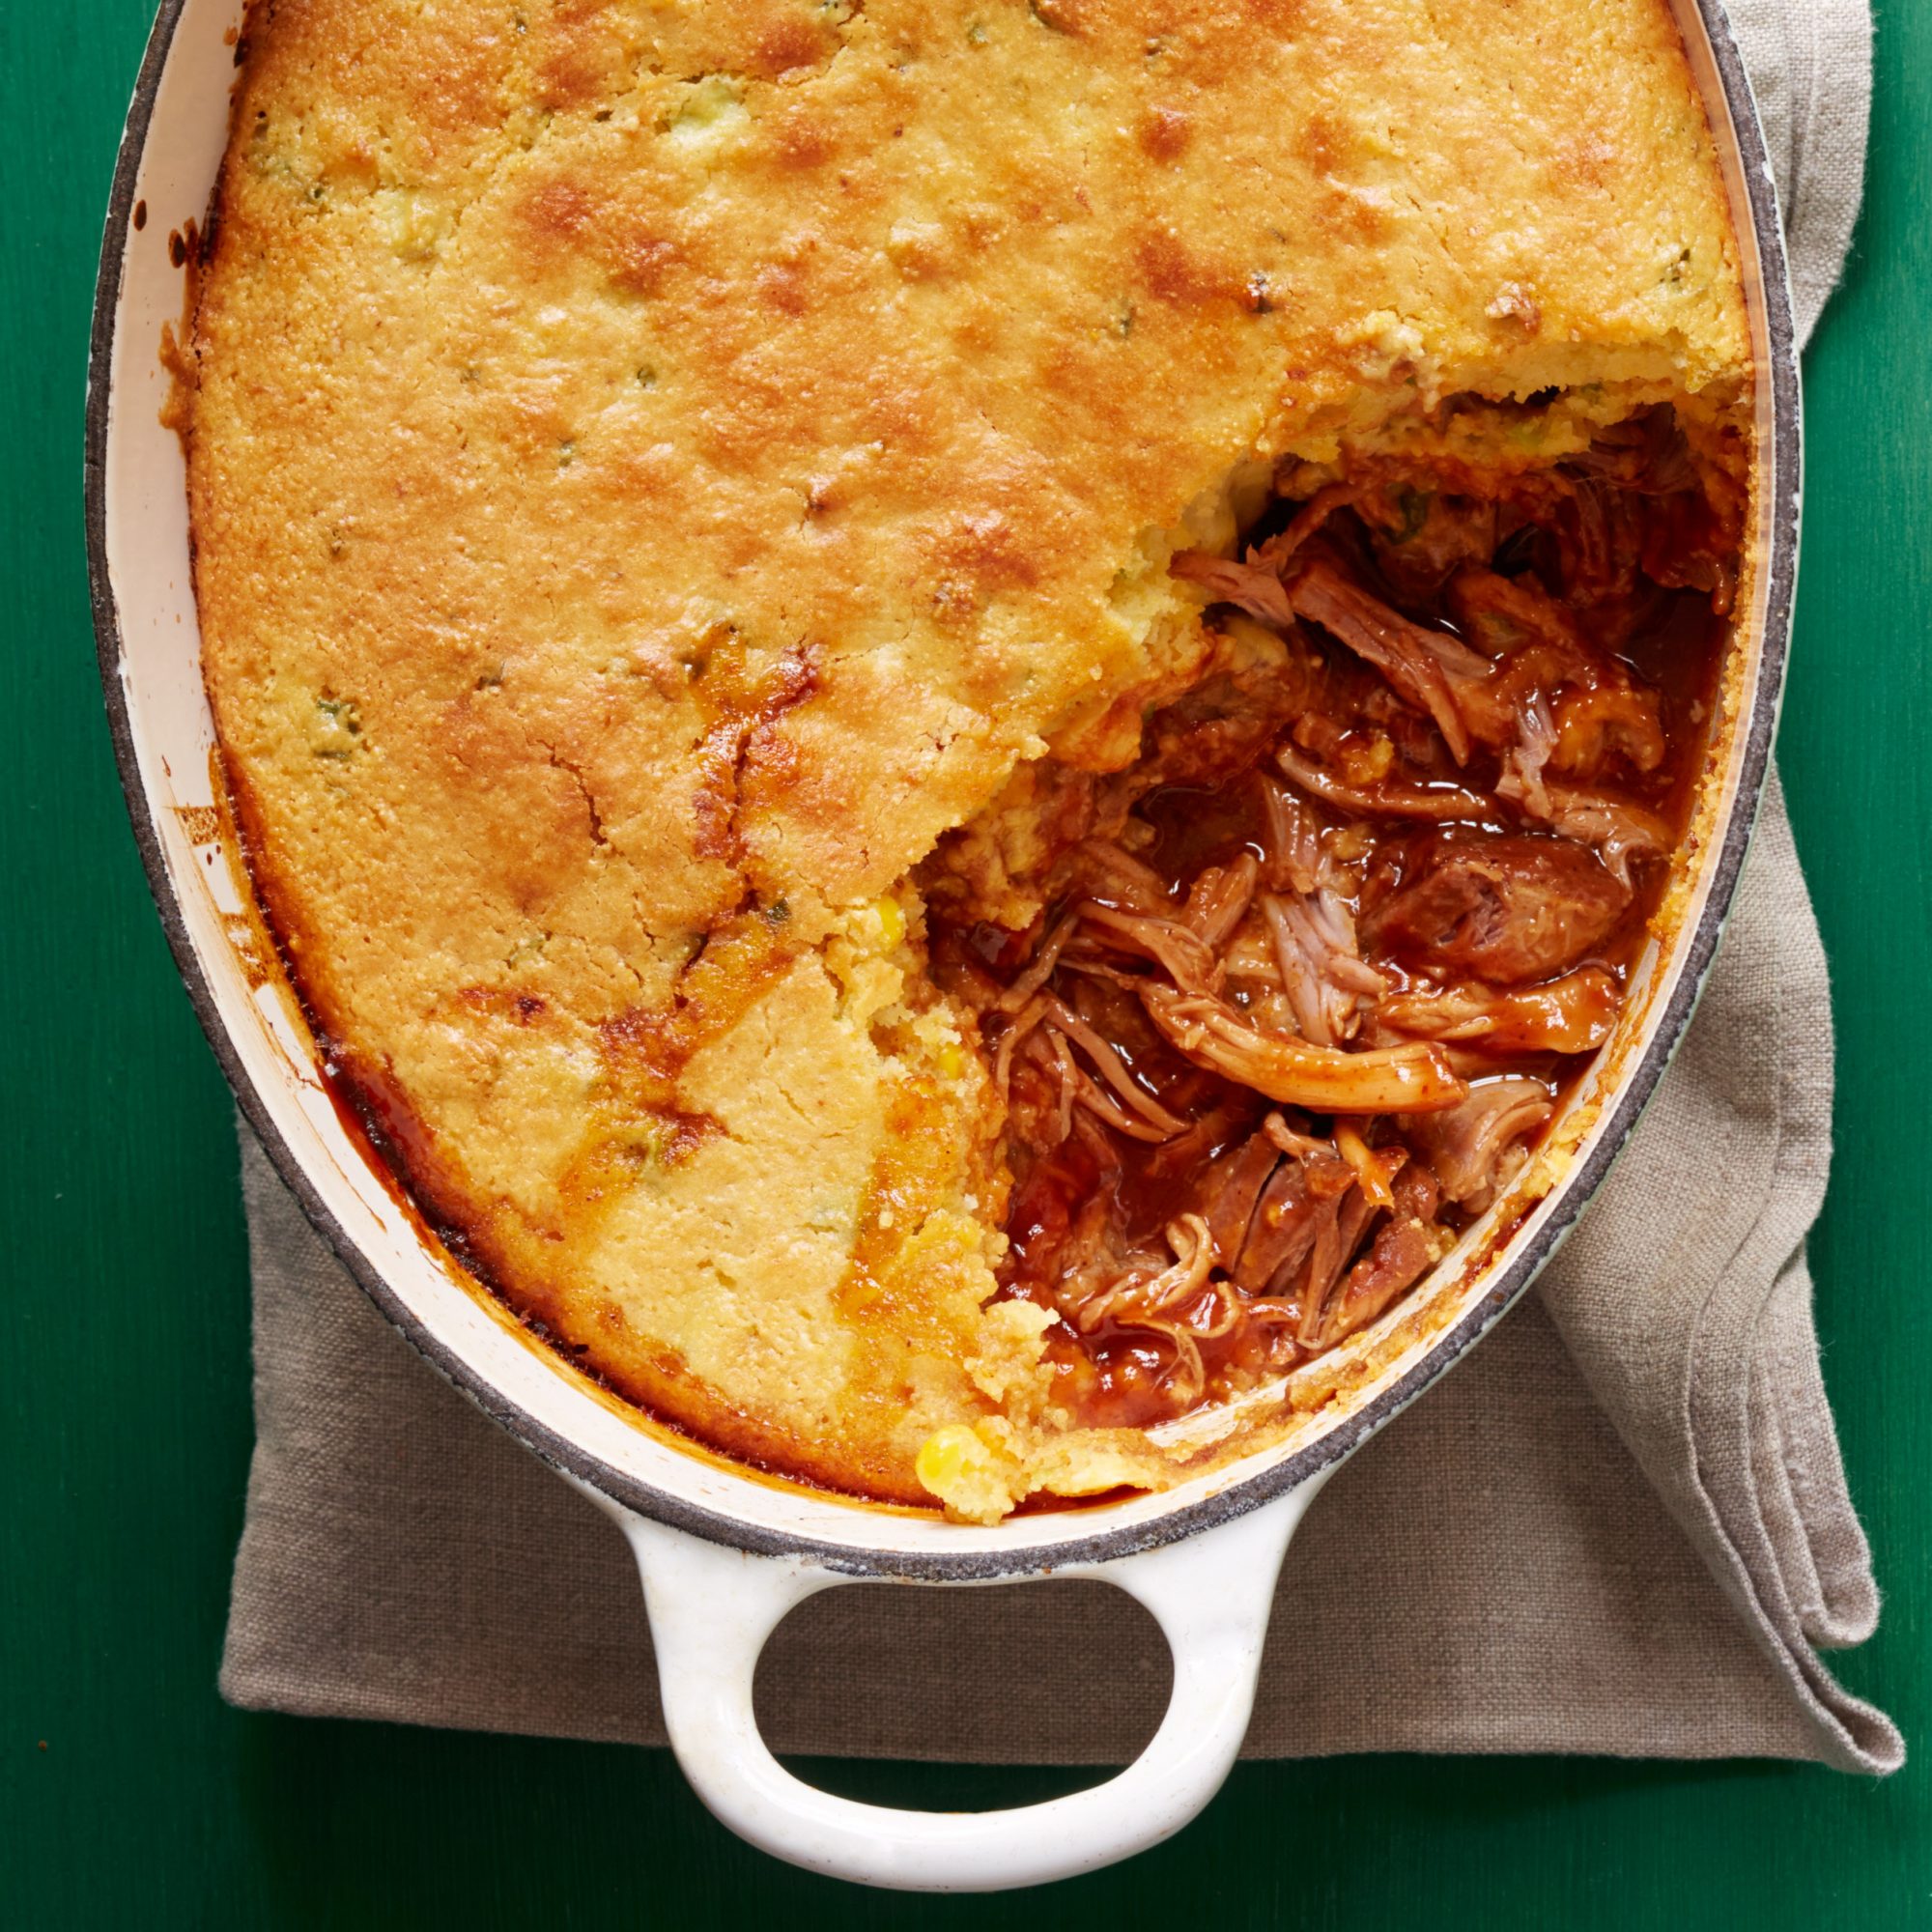 Pulled Pork with Cornbread Topping